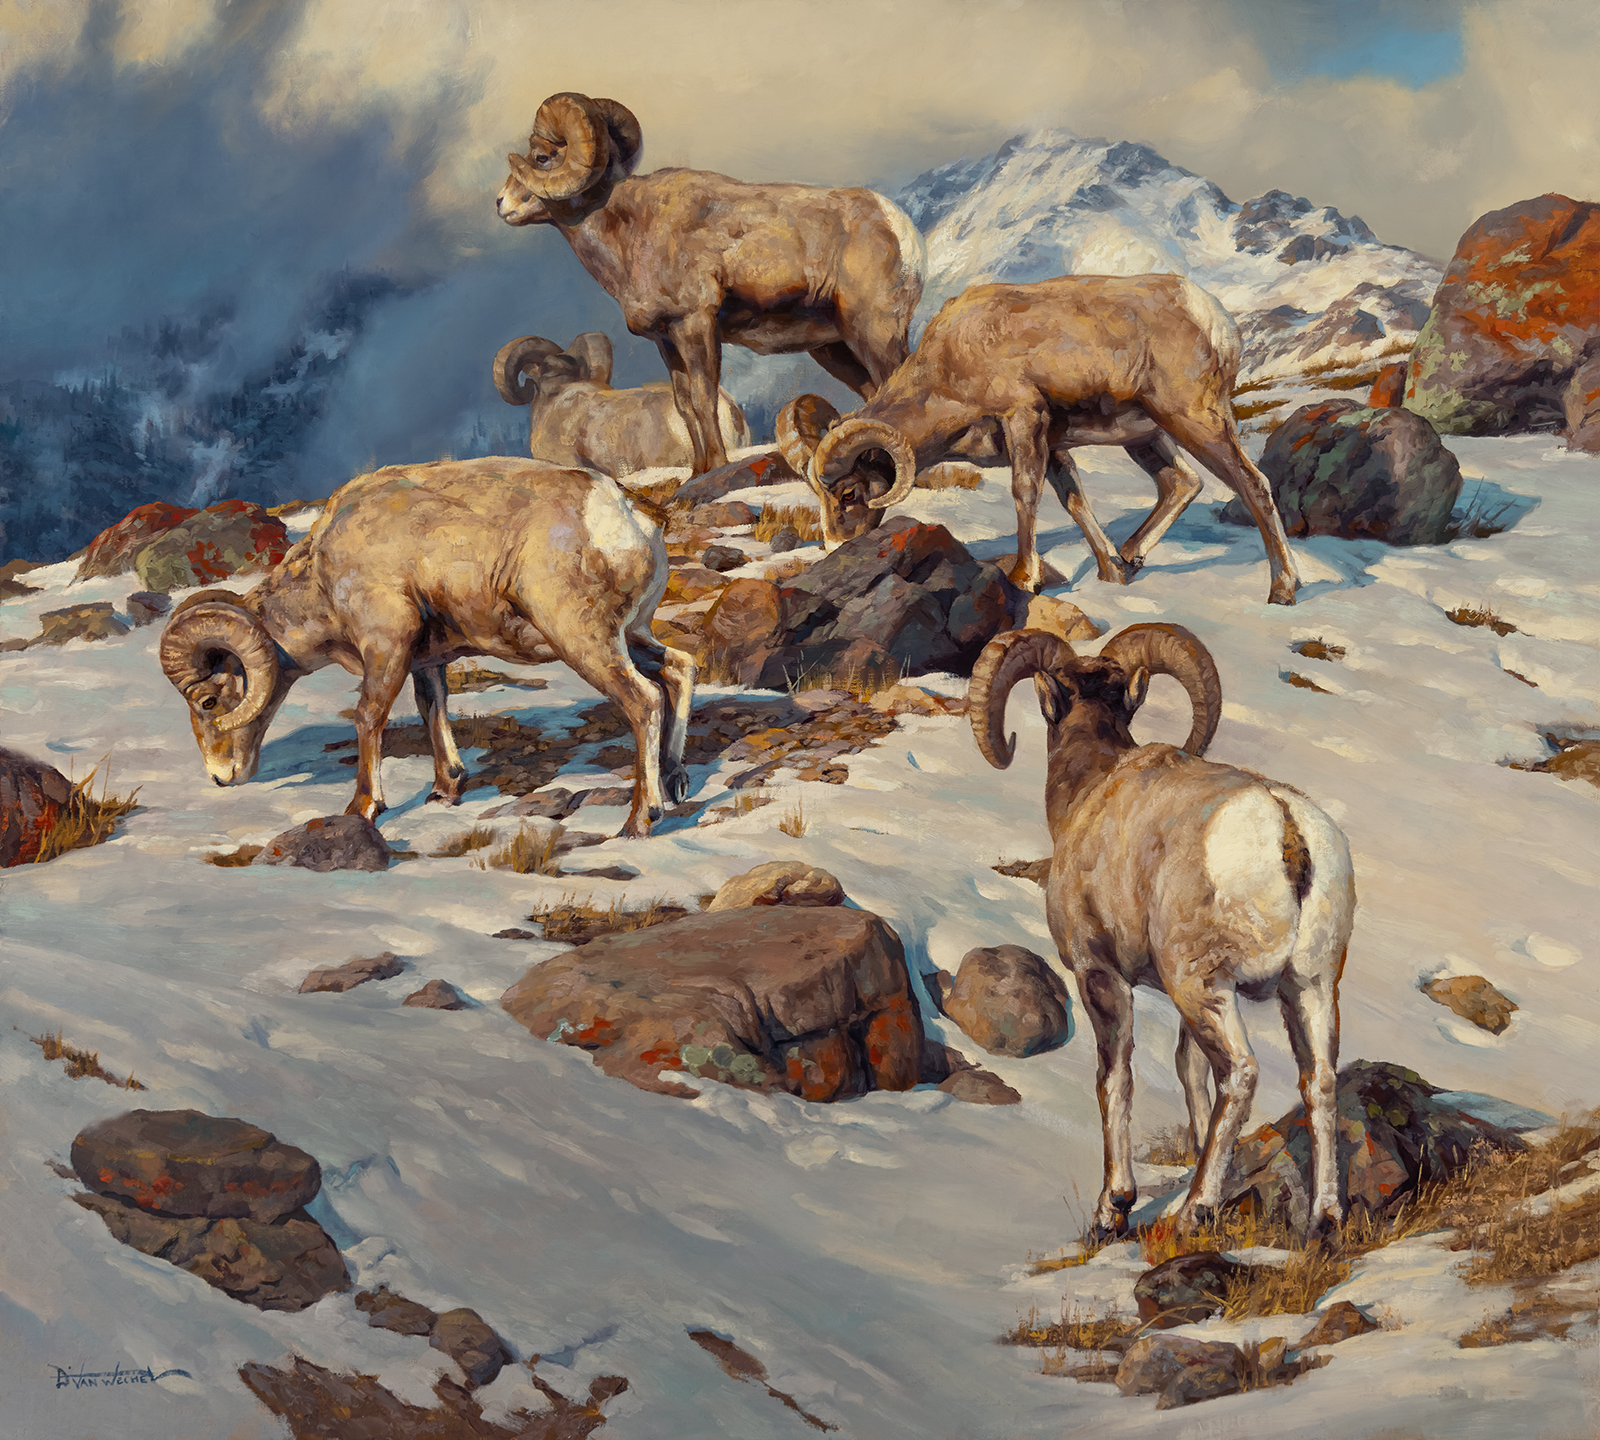 Wildlife painting - Dustin Van Wechel, “The Search Continues," oil, 36 x 40 in.